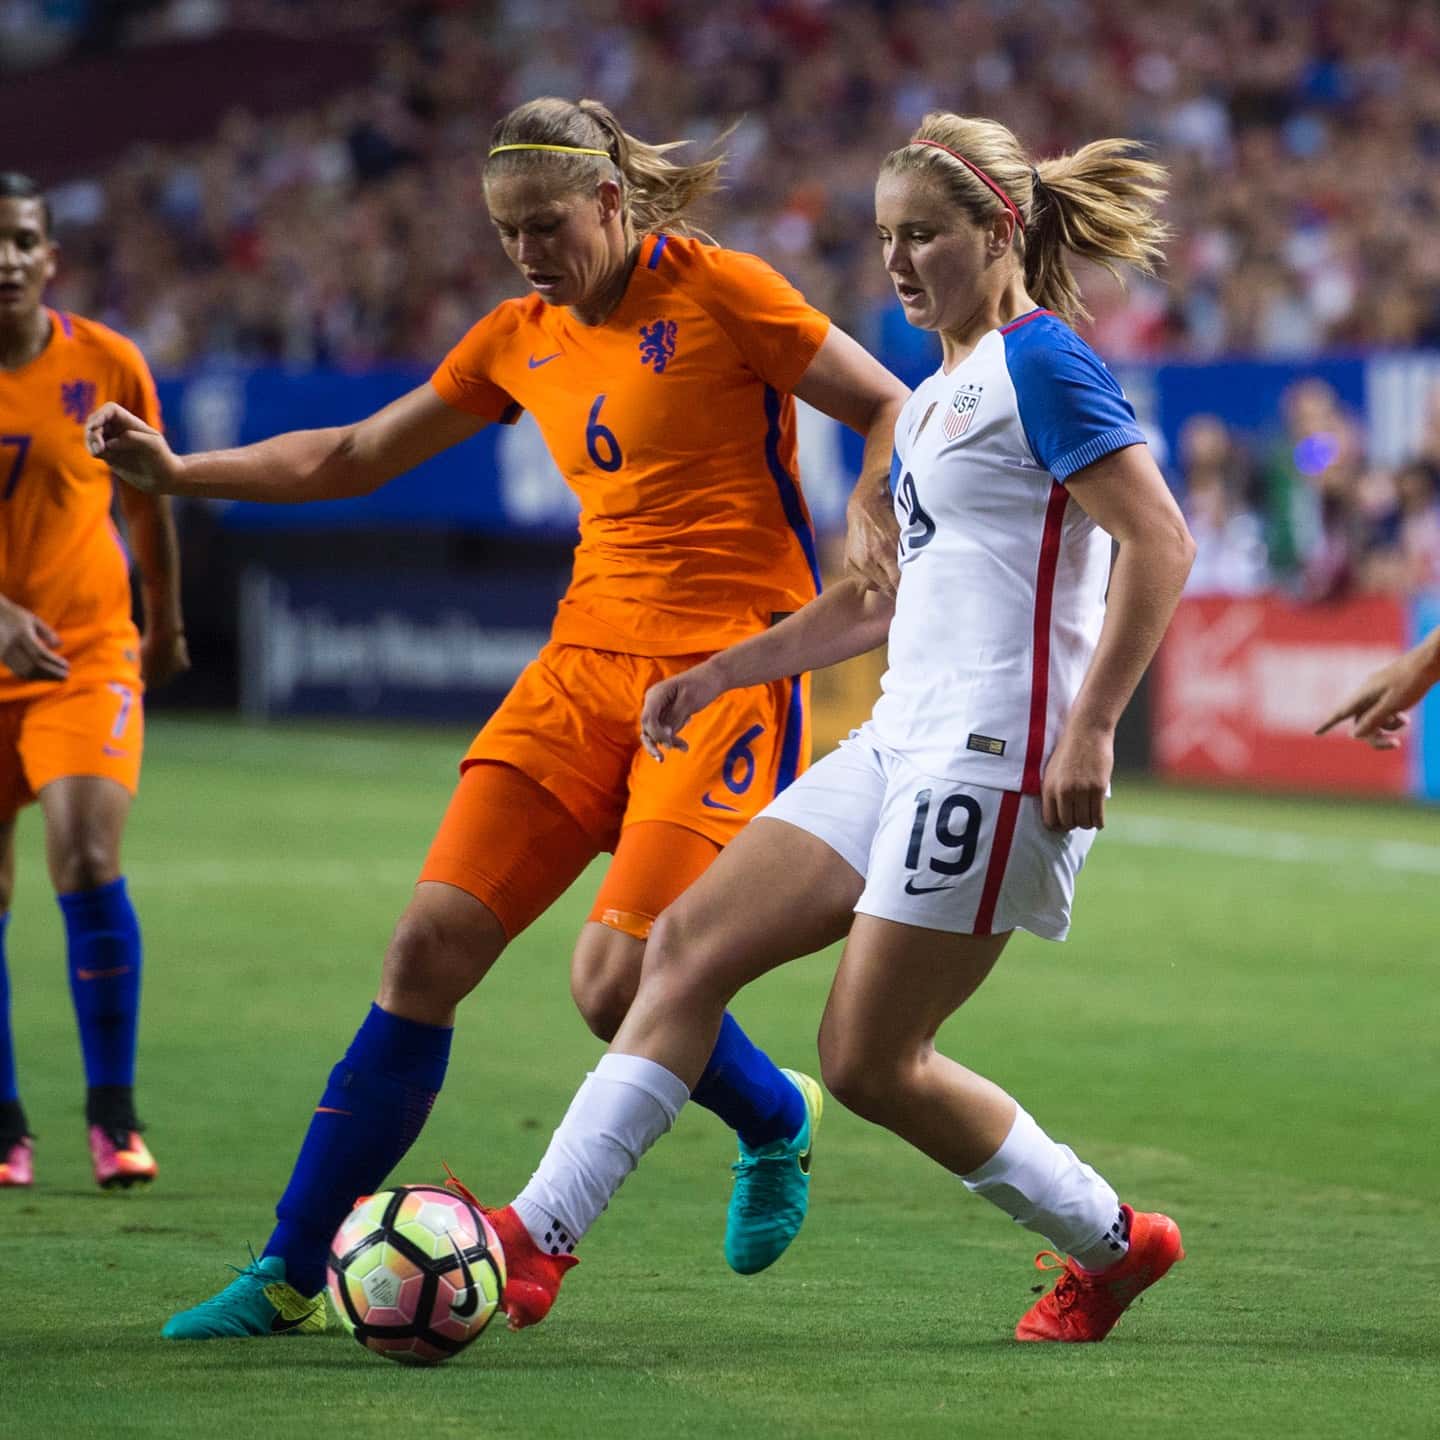 USA vs. Netherlands - Match History & Preview - Five Things to Know